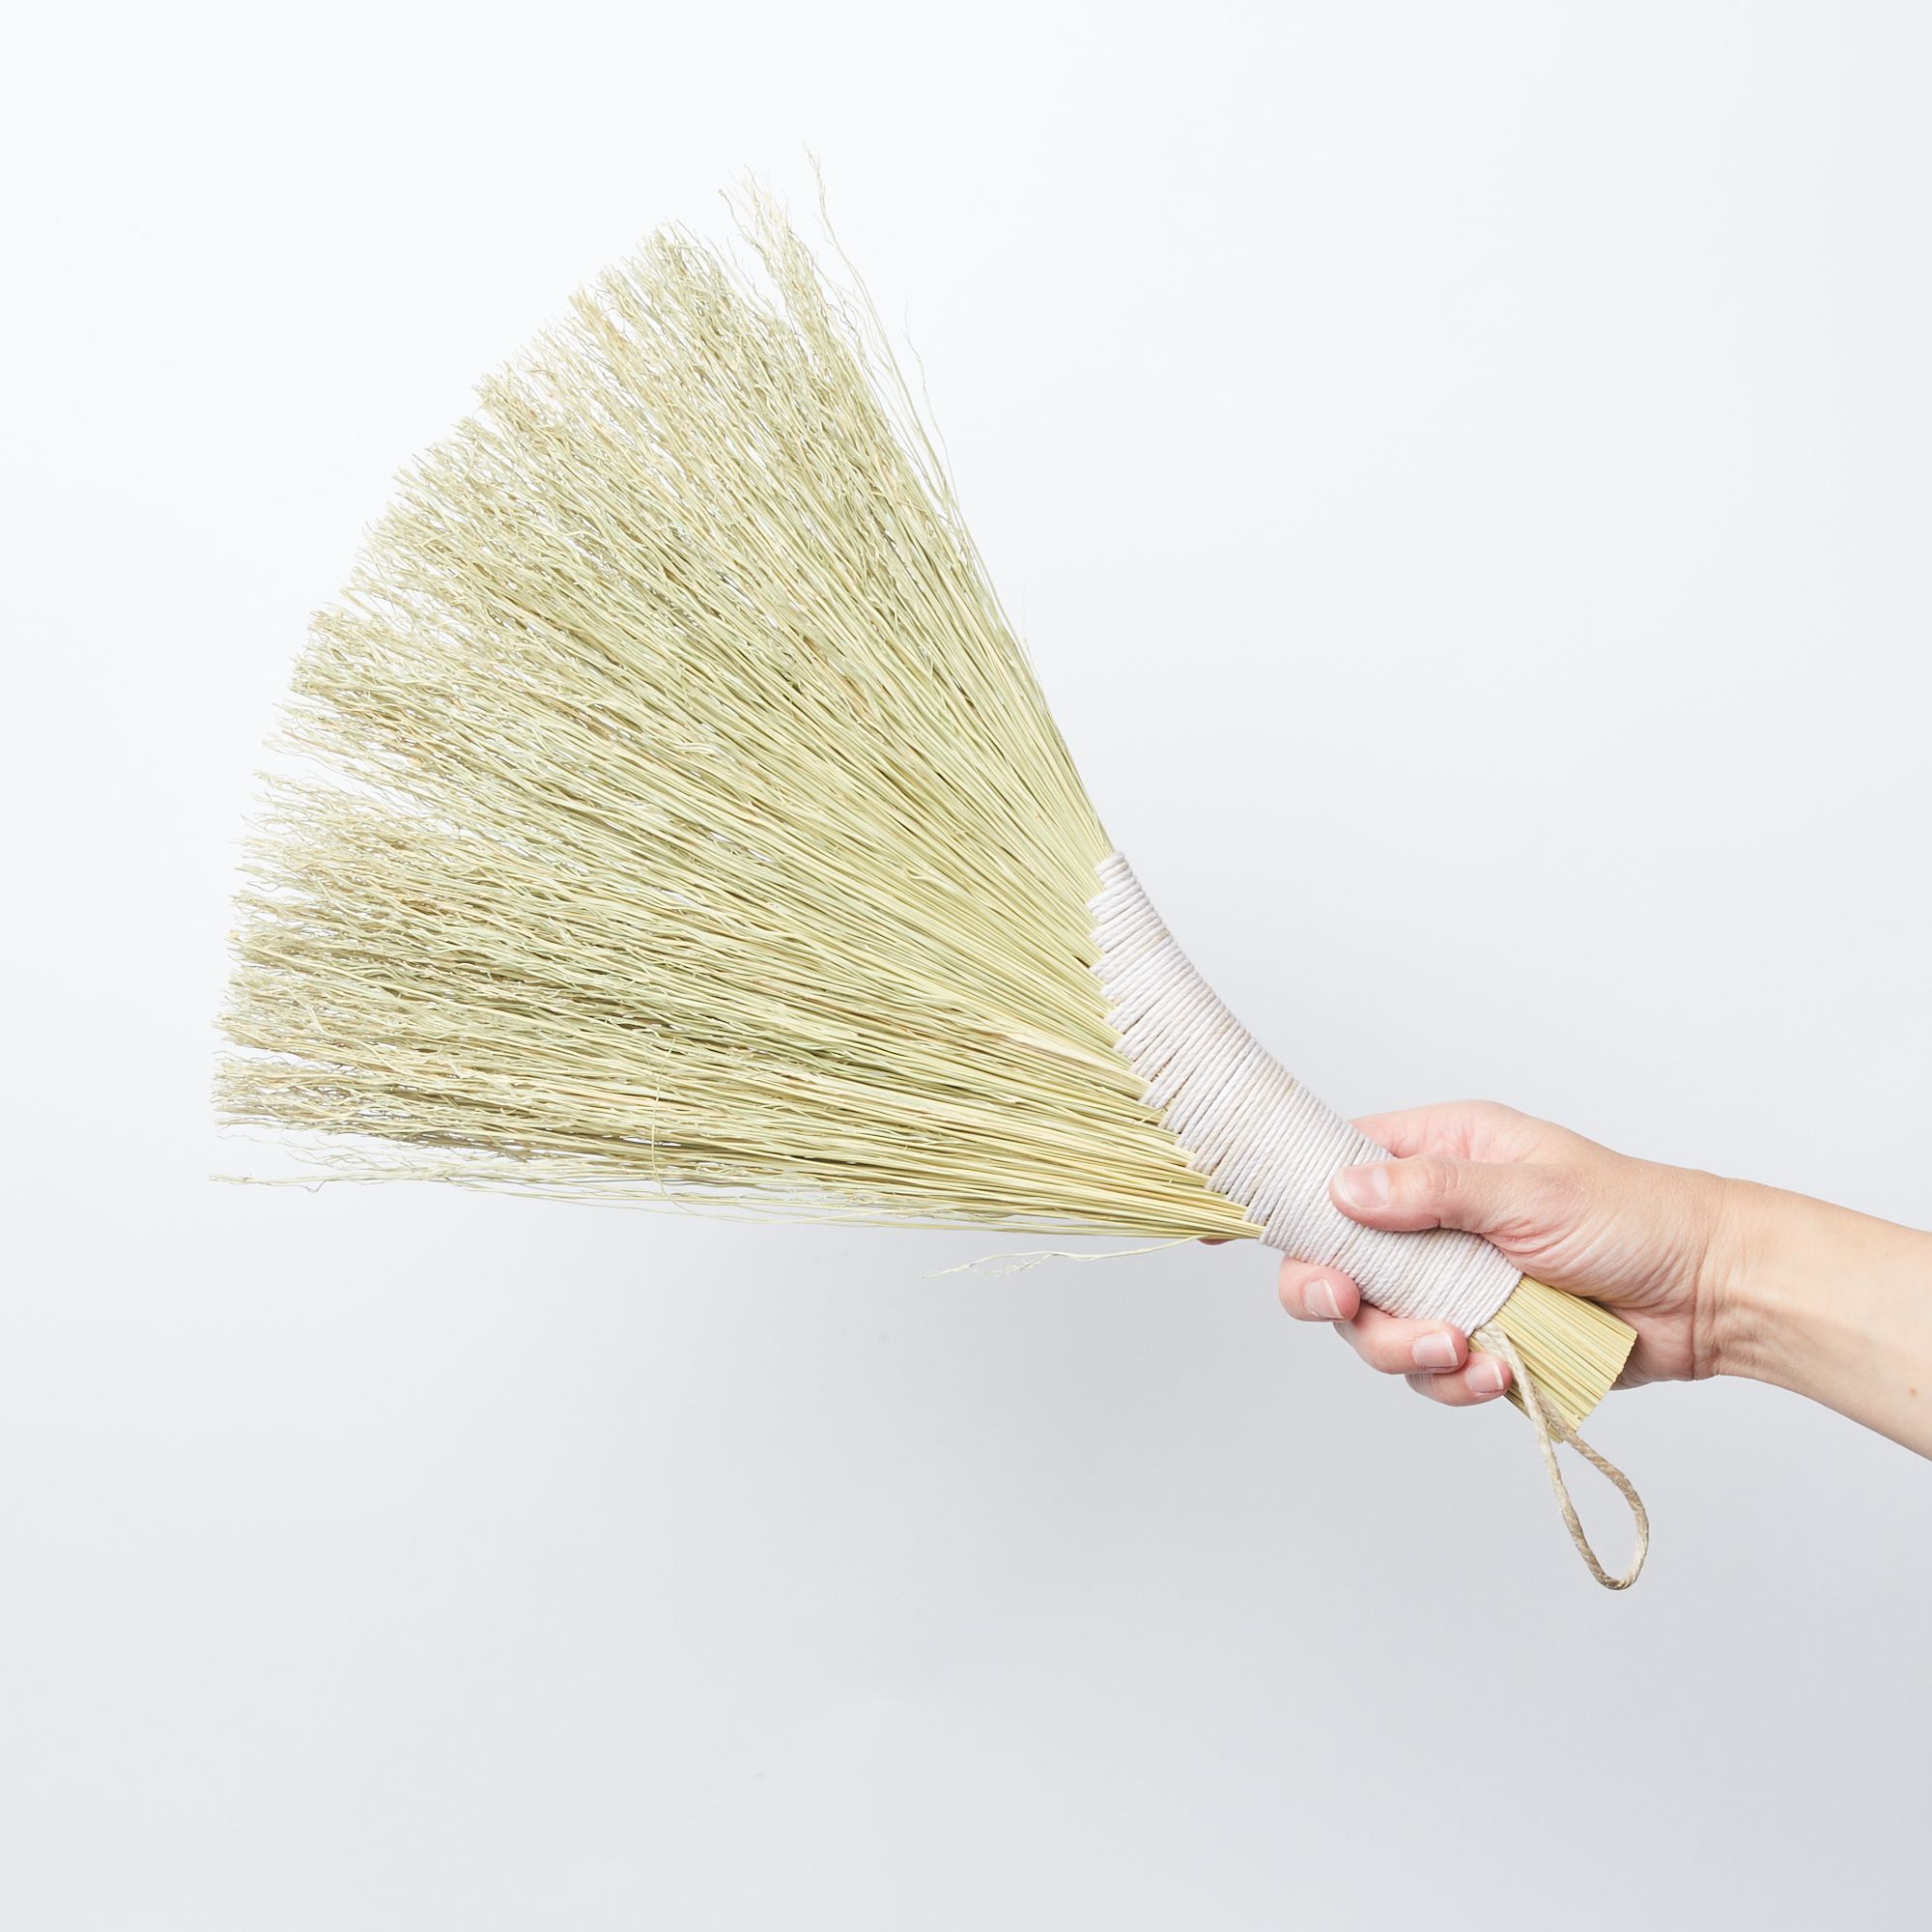 Hand holding a broom of sorghum that is tied at the handle and fans out at the head